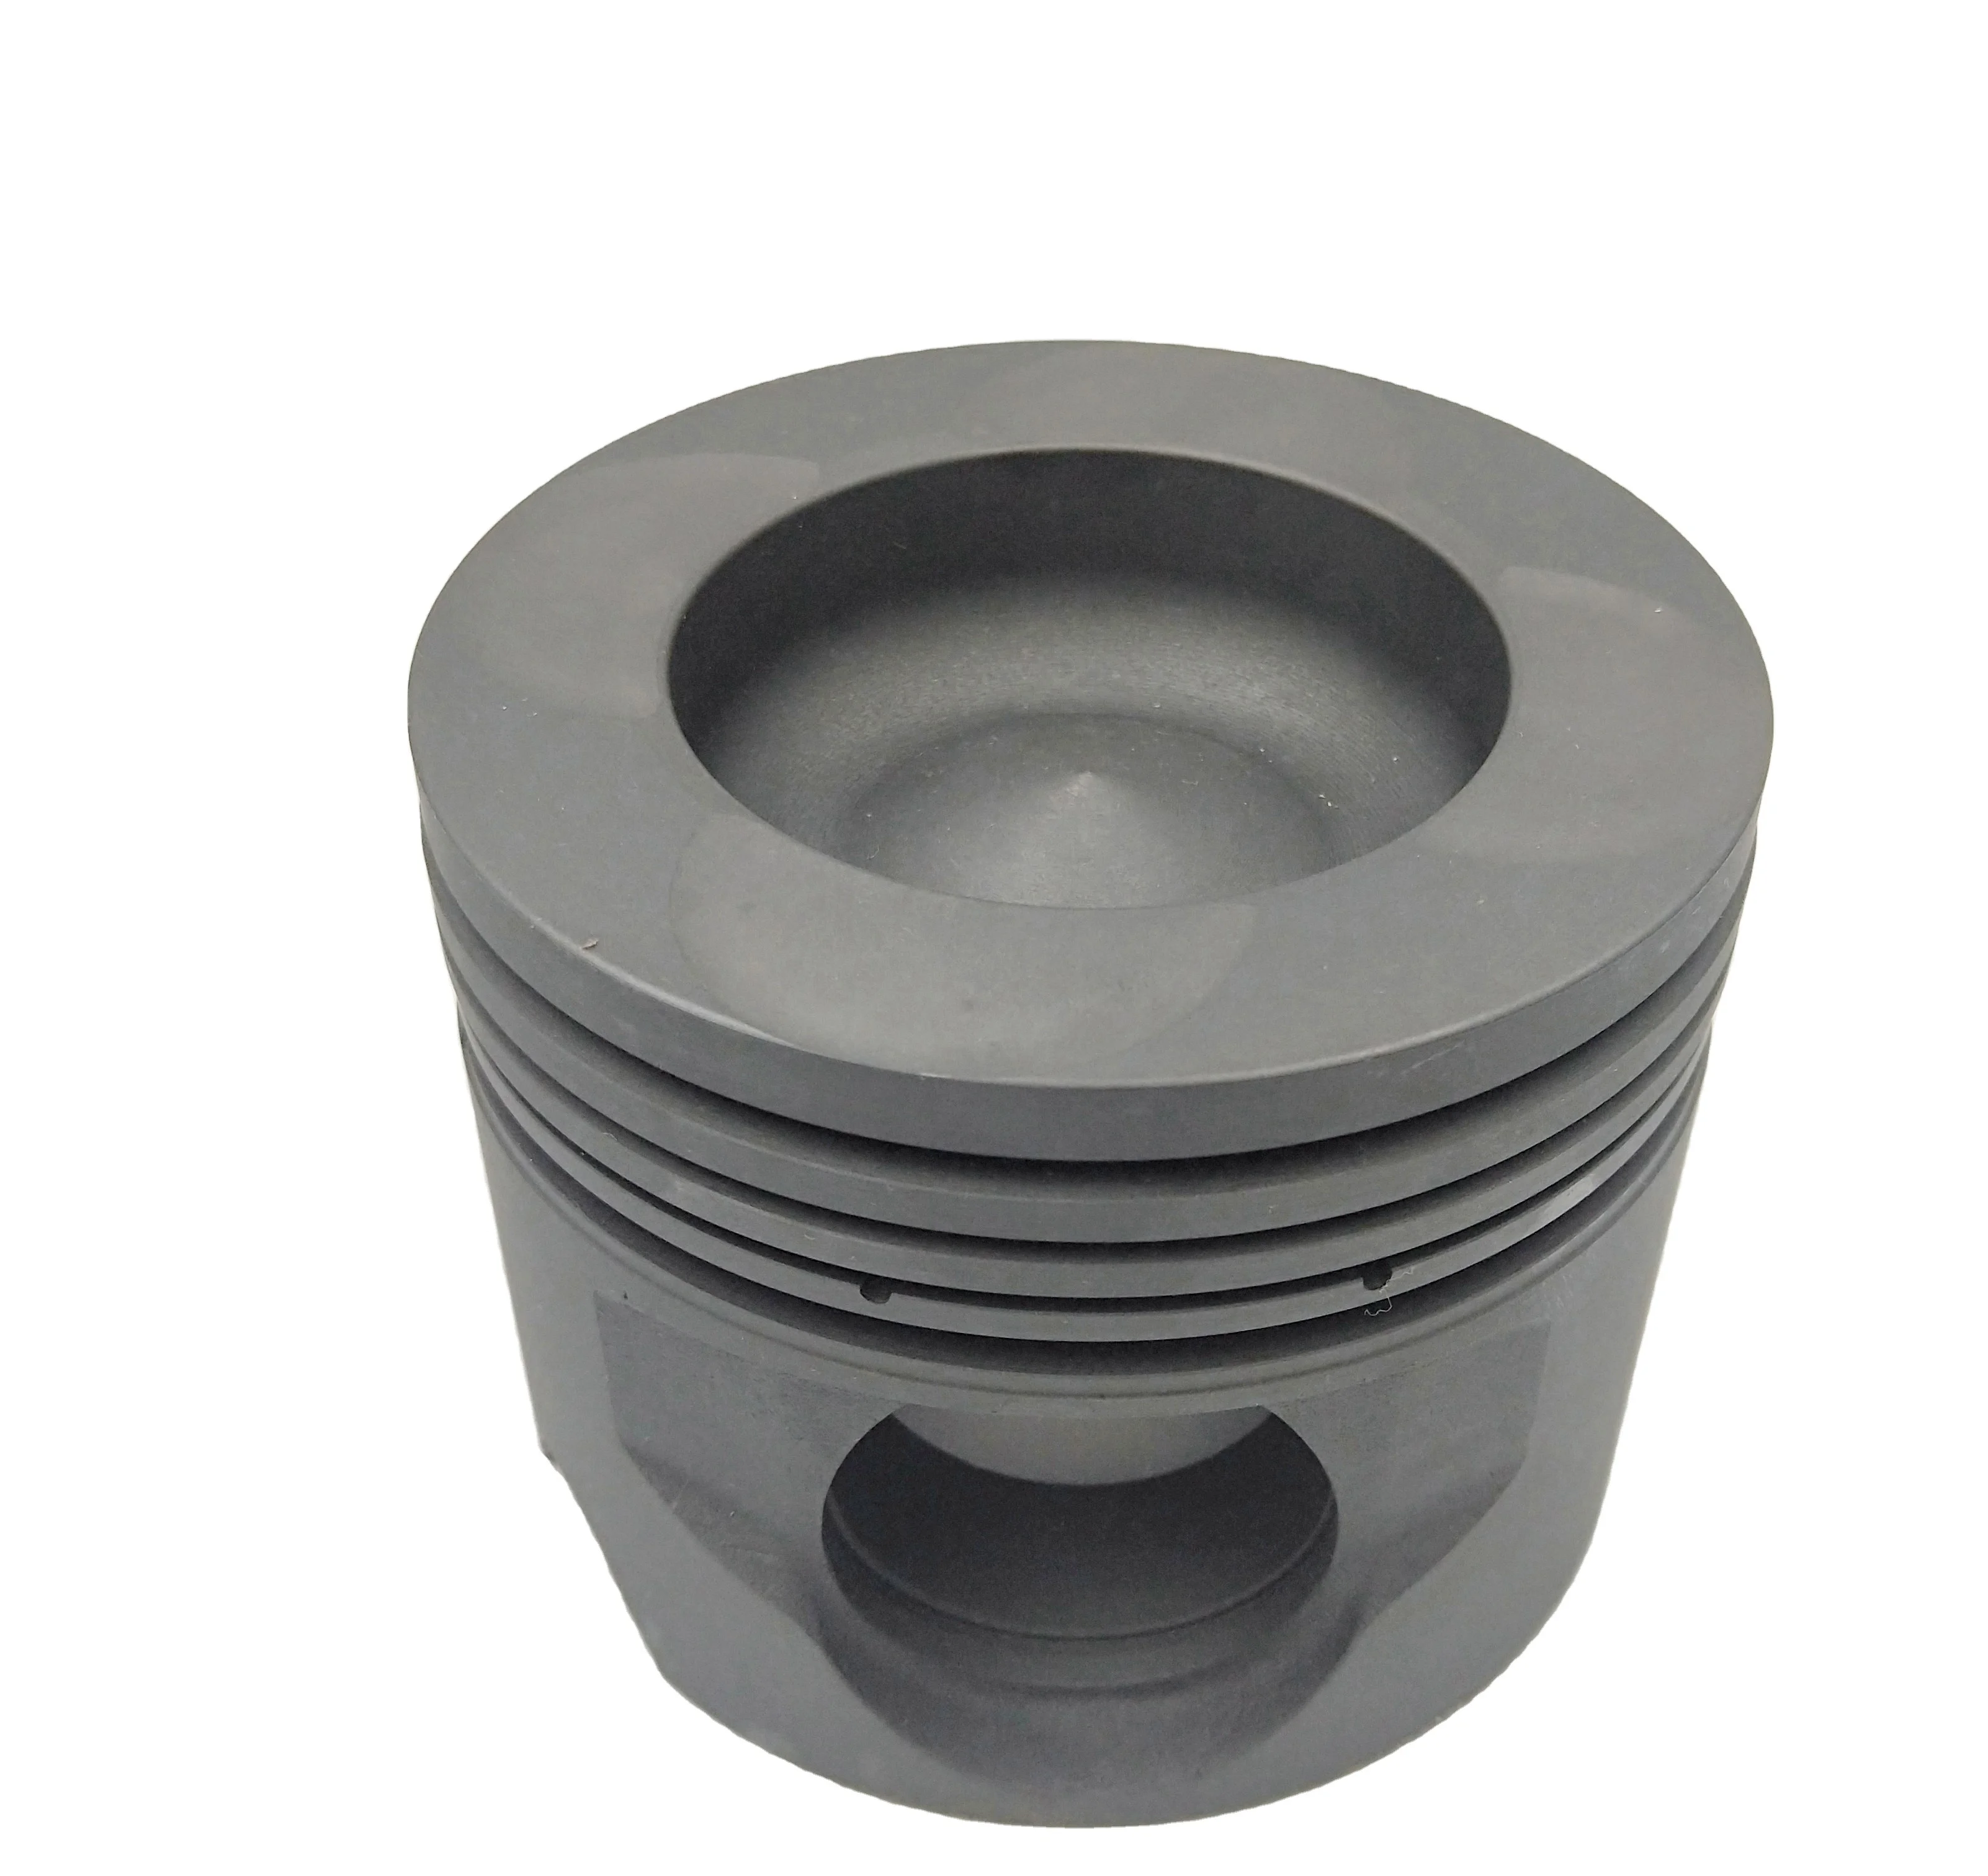 Jcar Piston P11c 13216 0230 Japanese Truck Diesel Engine For Hino - Buy  Spare Parts P11c 2723 0230 For Hino Piston